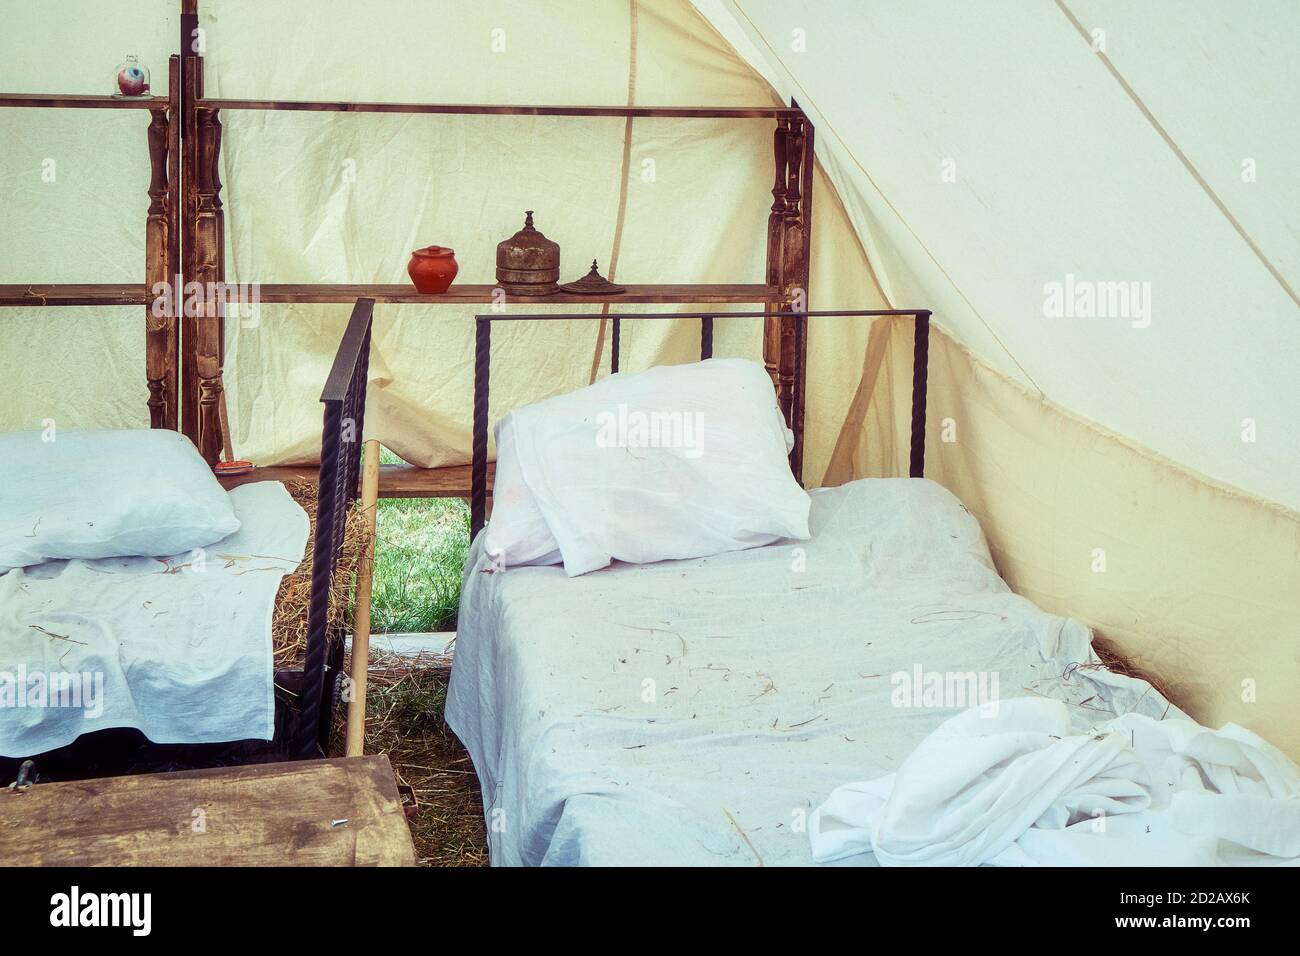 Bed under a large tent retro field hospital. Military field medicine in the 18th or 19th century. Portable hospital for wounded soldiers. Stock Photo